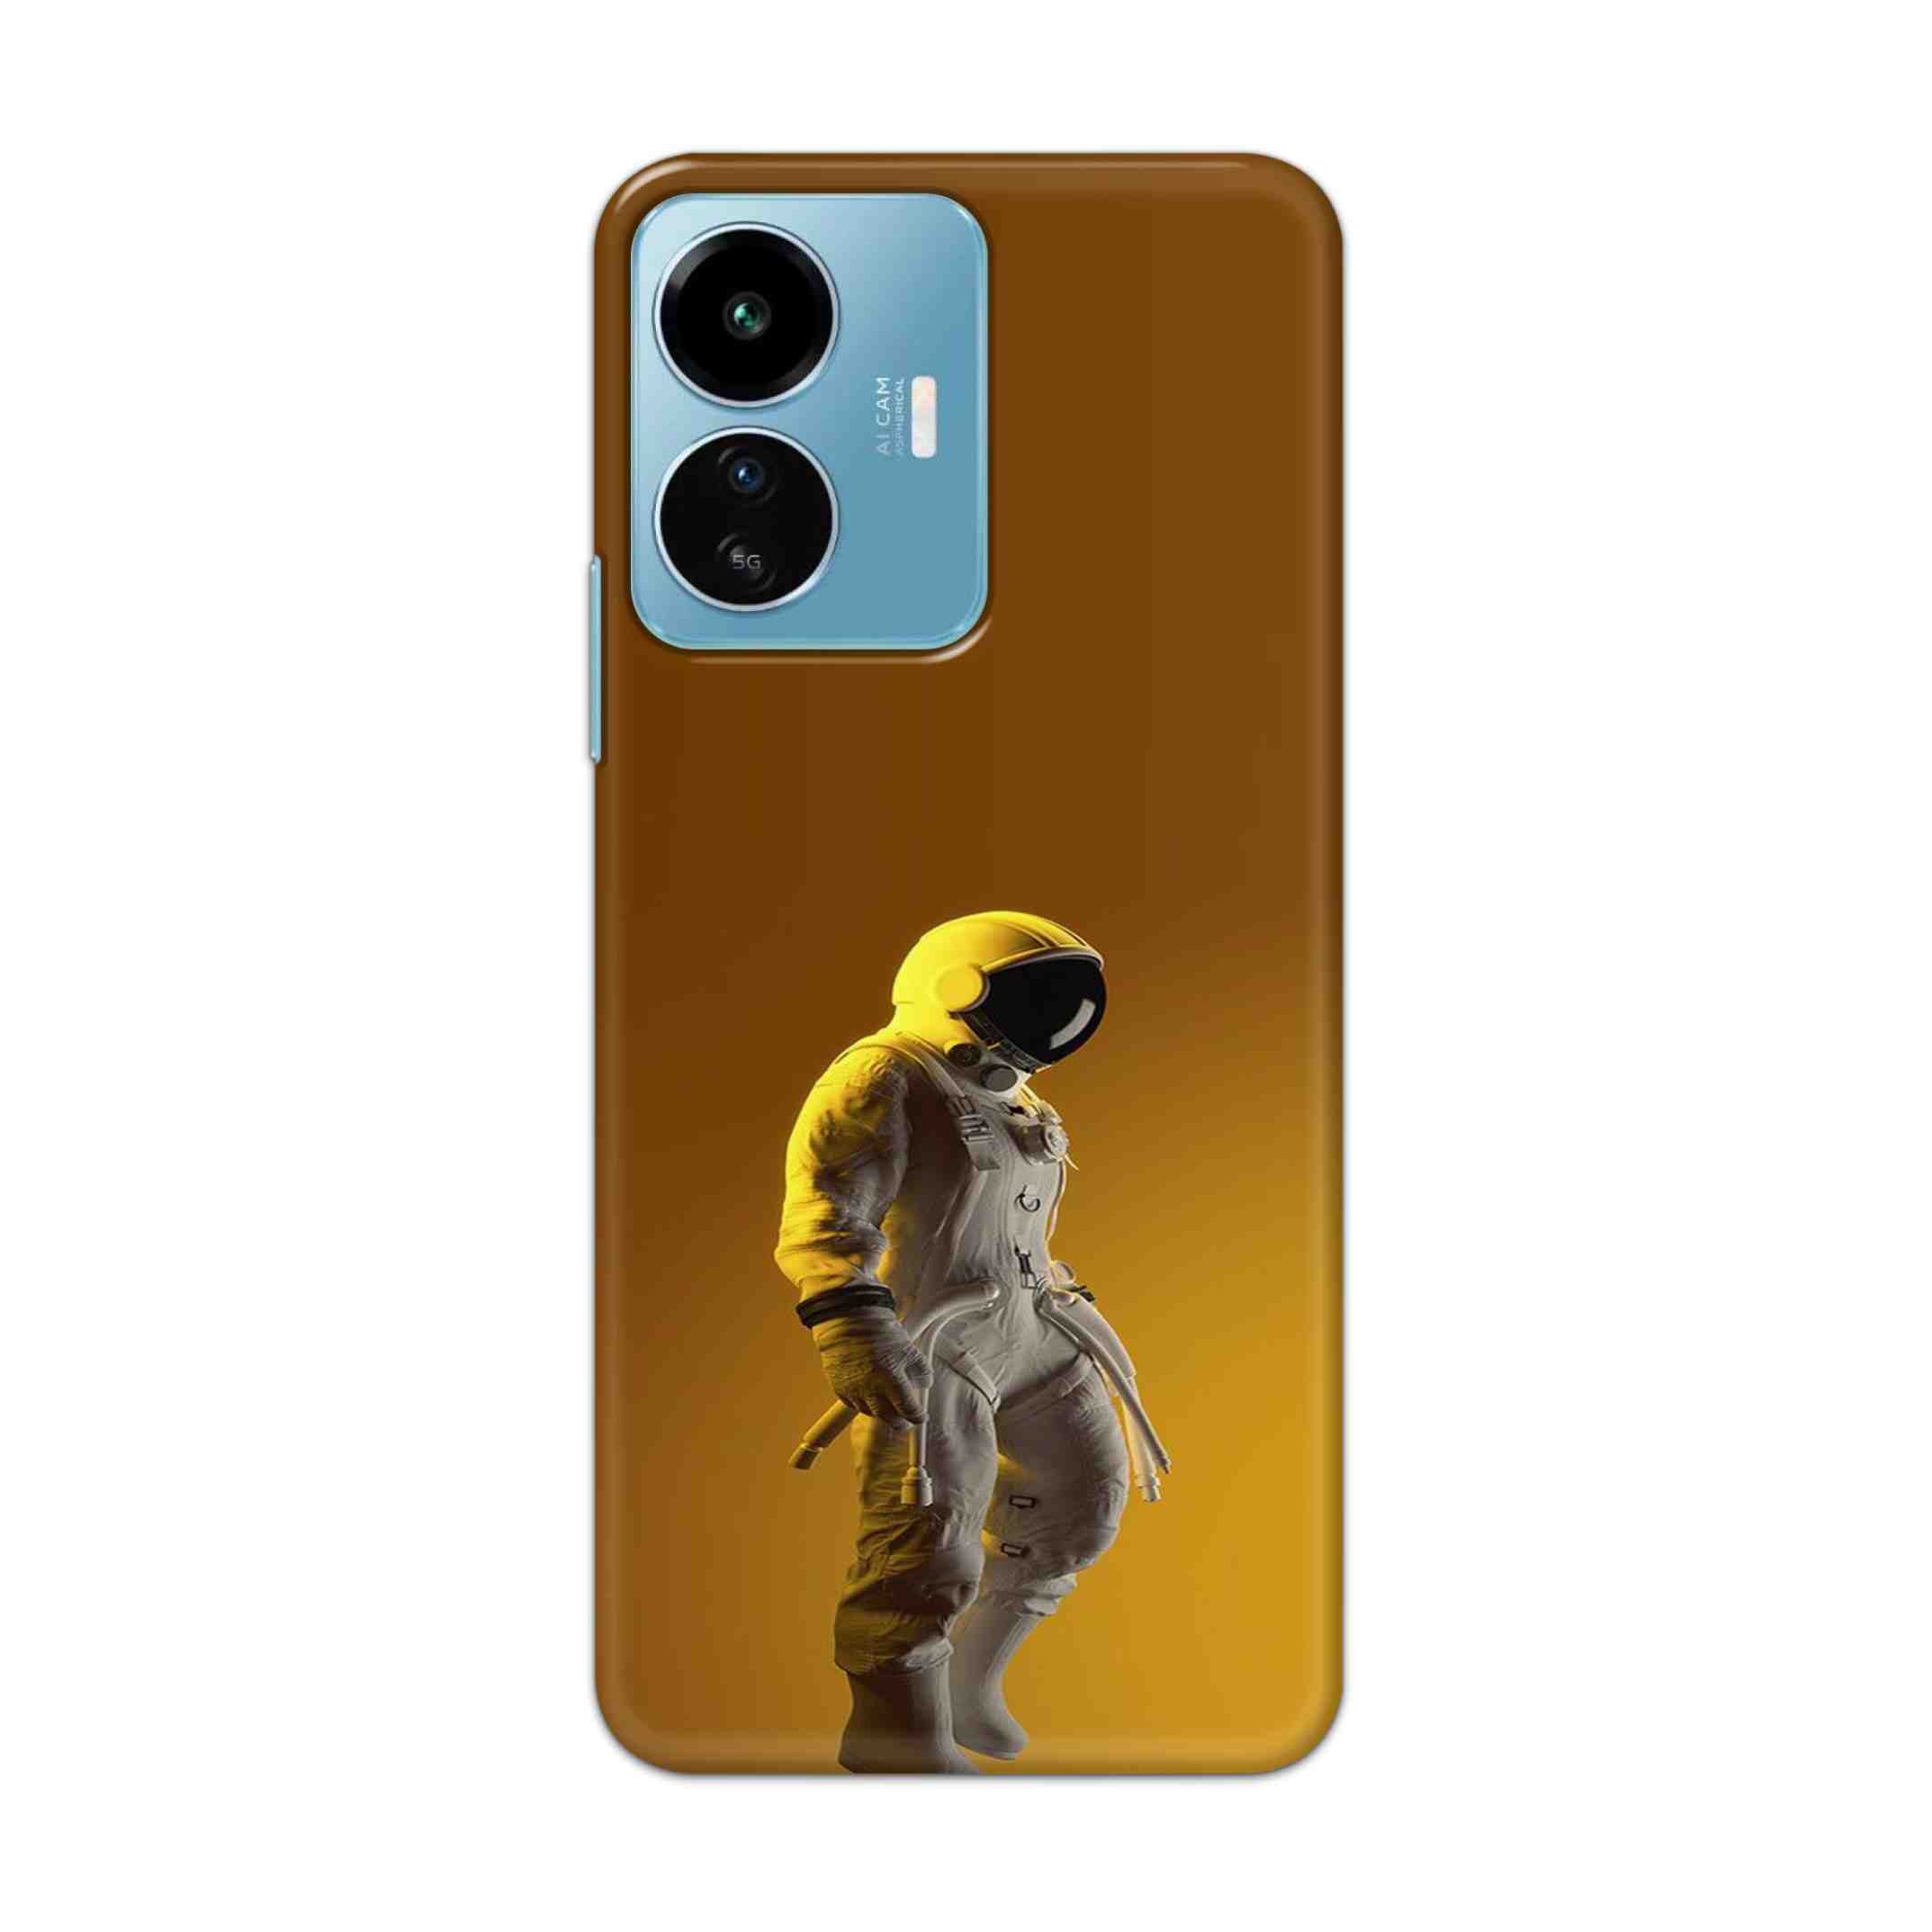 Buy Yellow Astronaut Hard Back Mobile Phone Case Cover For IQOO Z6 Lite 5G Online